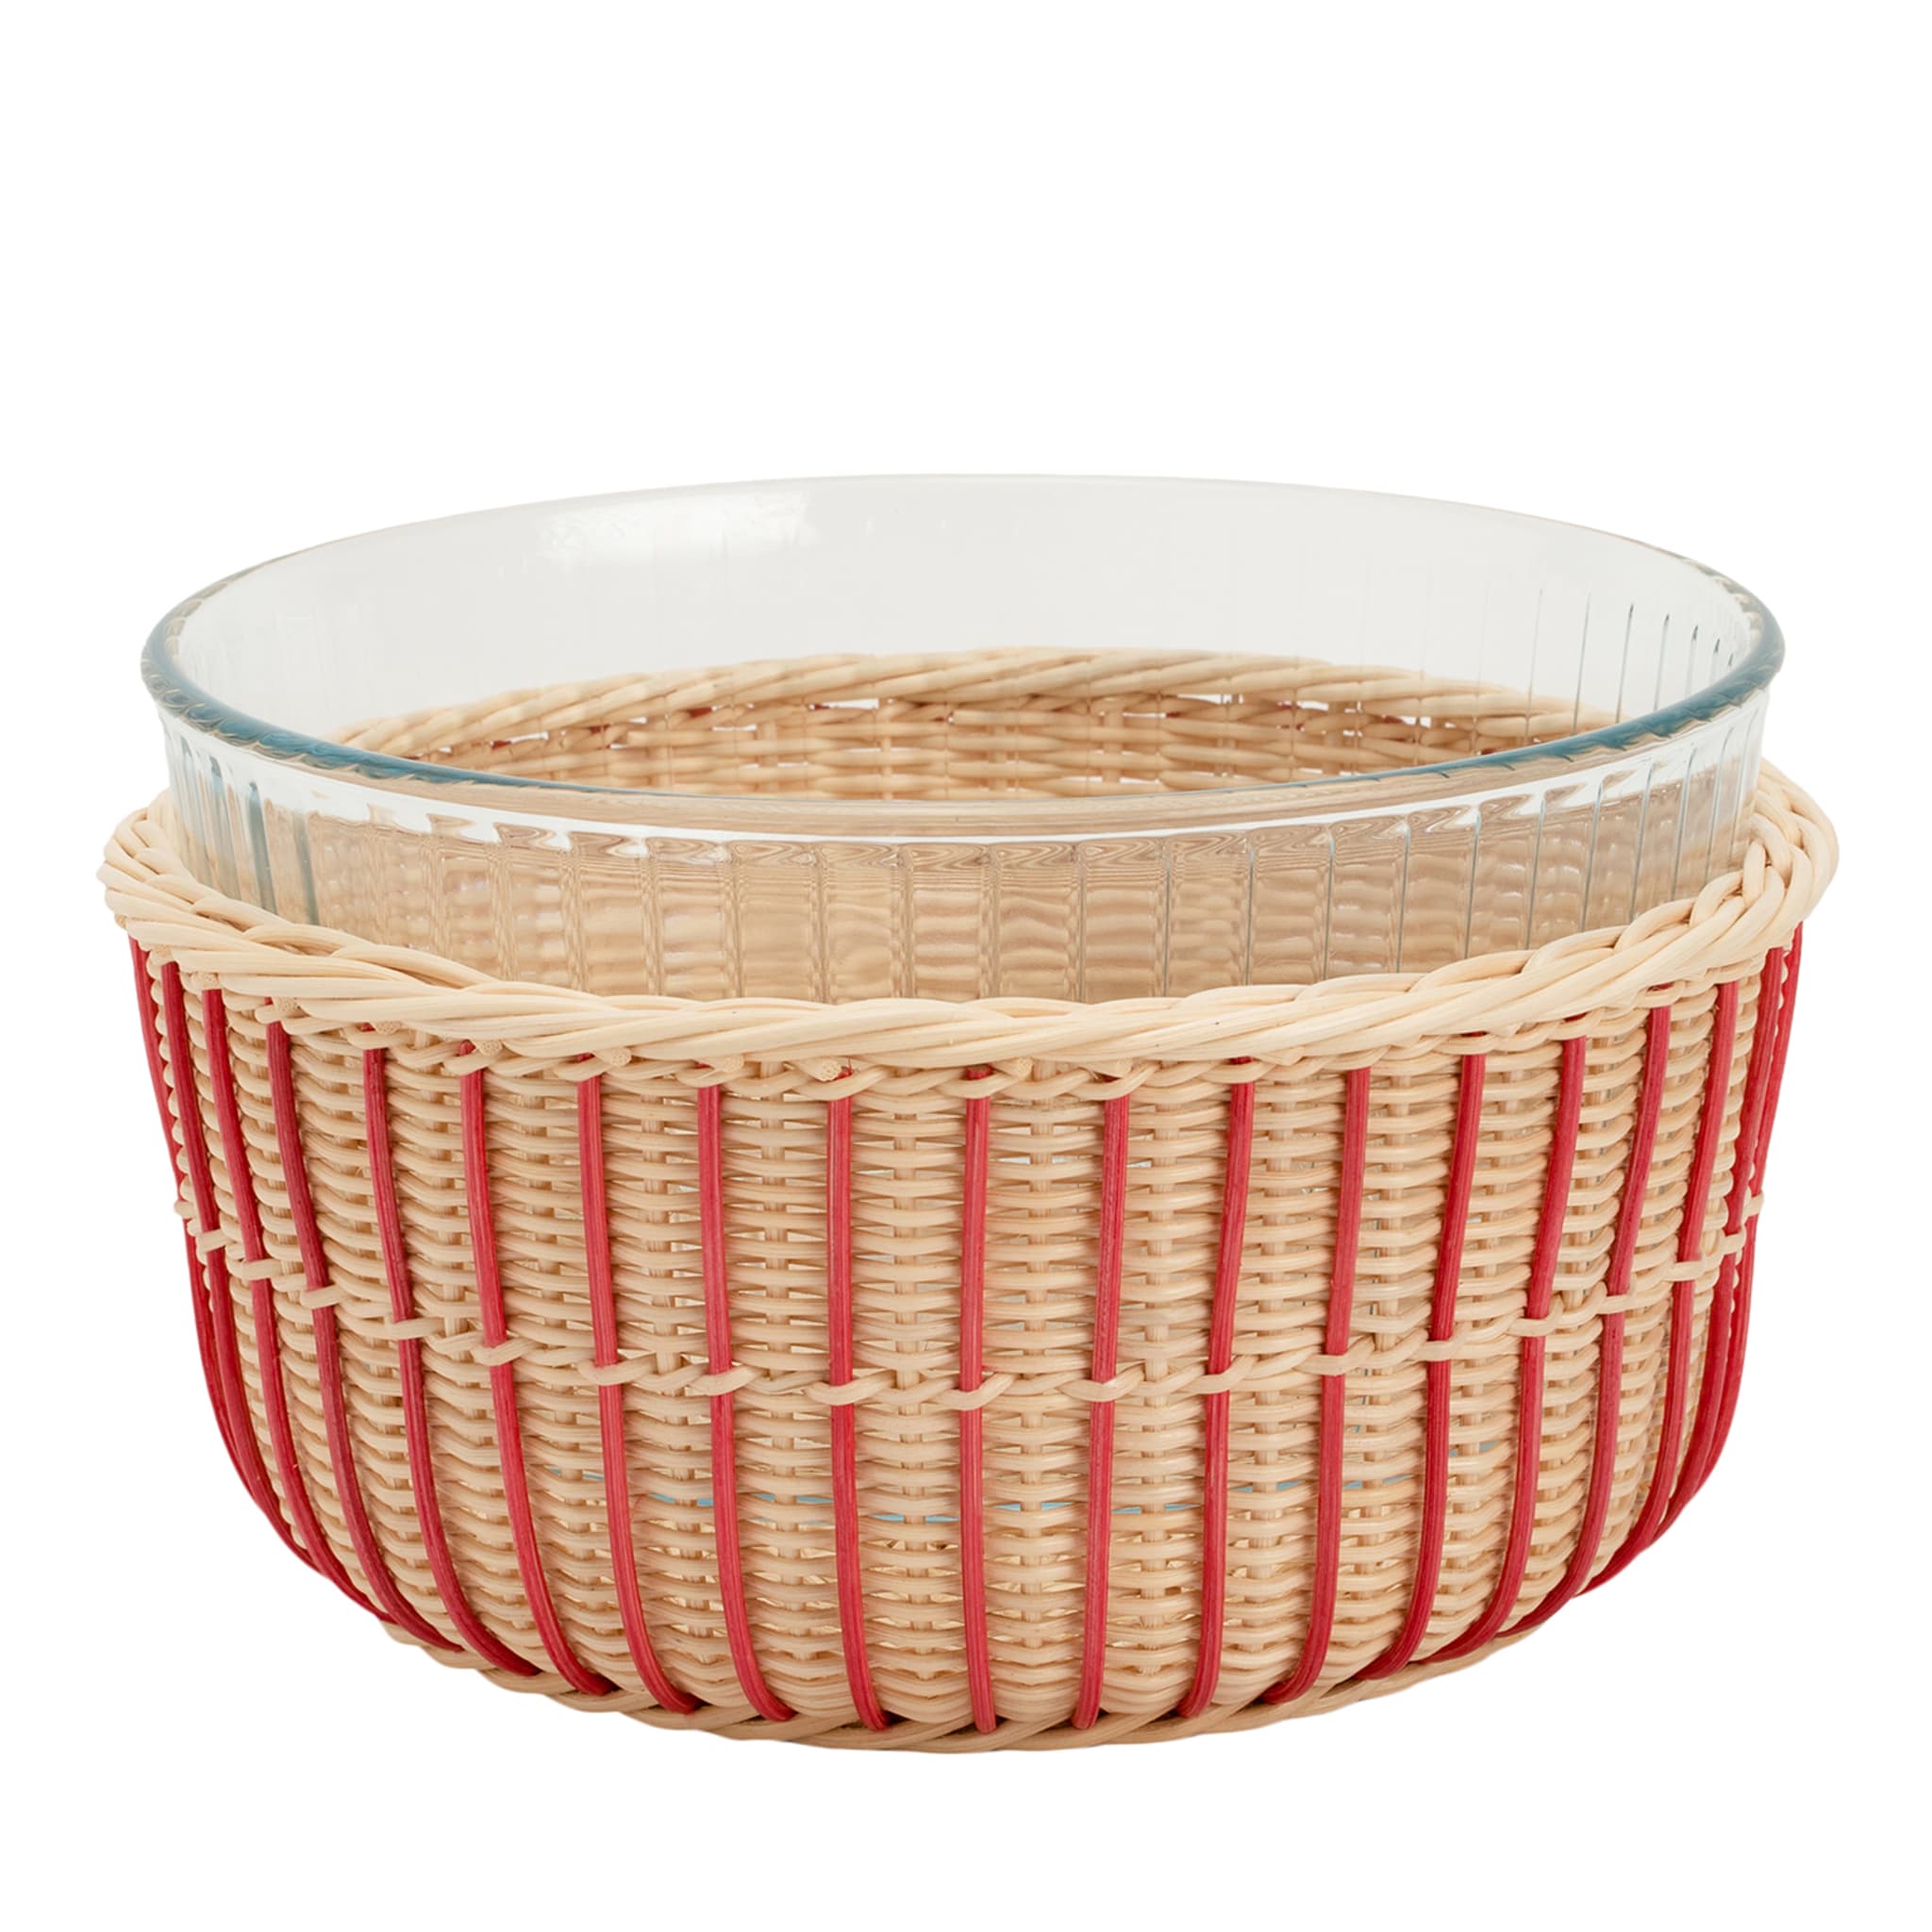 Soufflé Mold With Wicker Basket - Main view